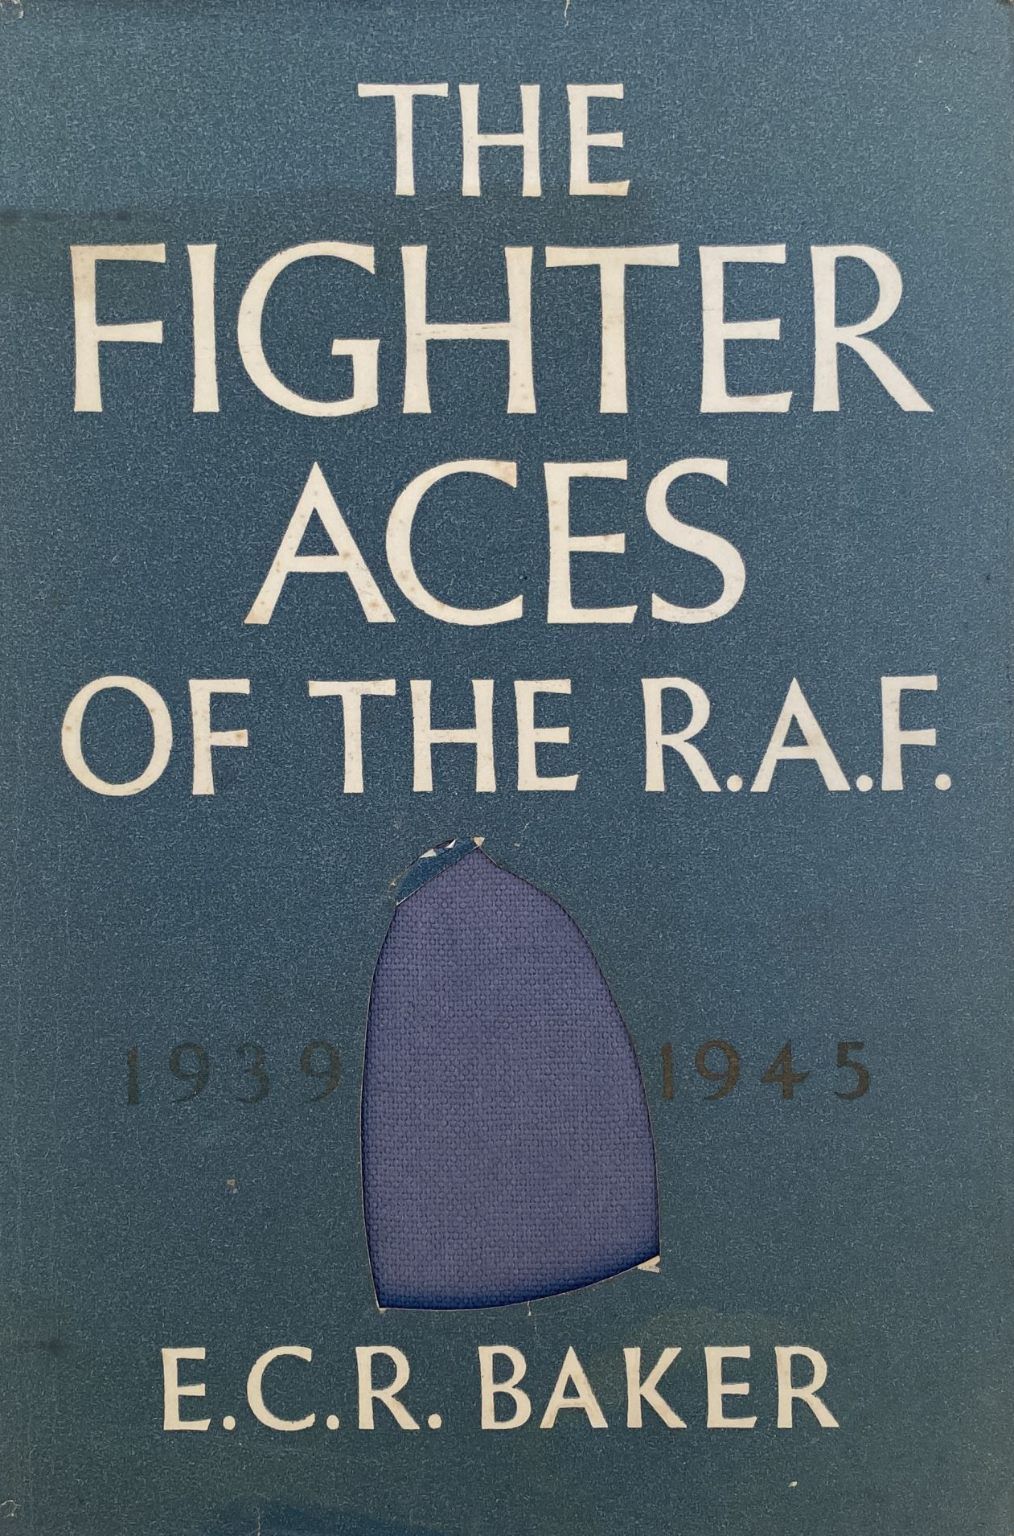 THE FIGHTER ACES OF THE R.A.F.